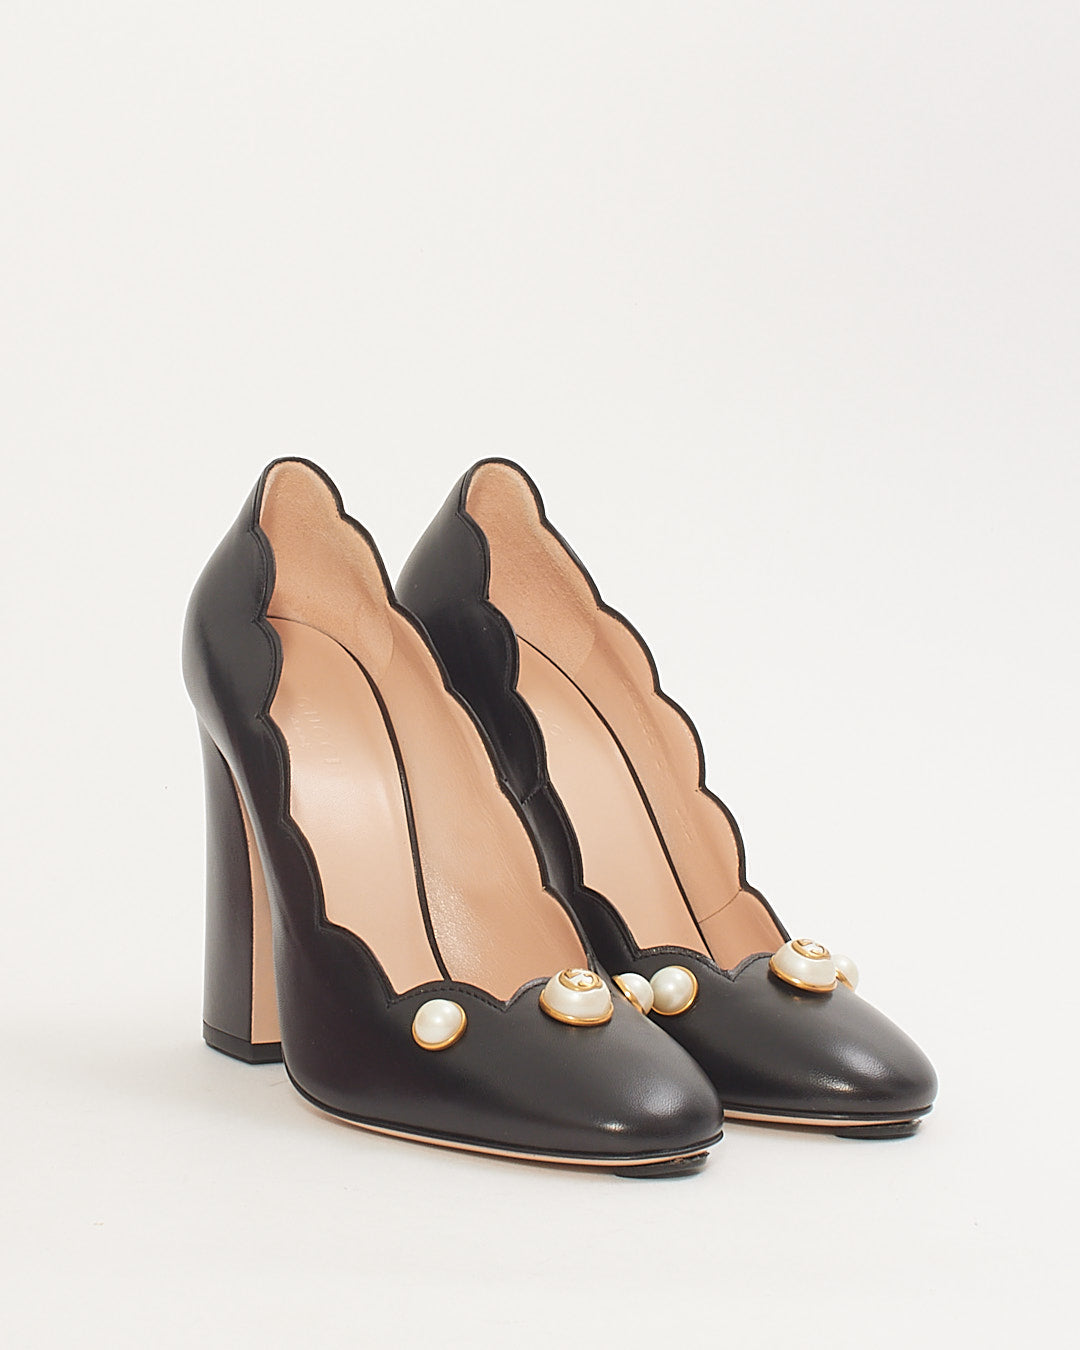 Gucci Black Leather Pearl Embellished Willow Pumps - 39